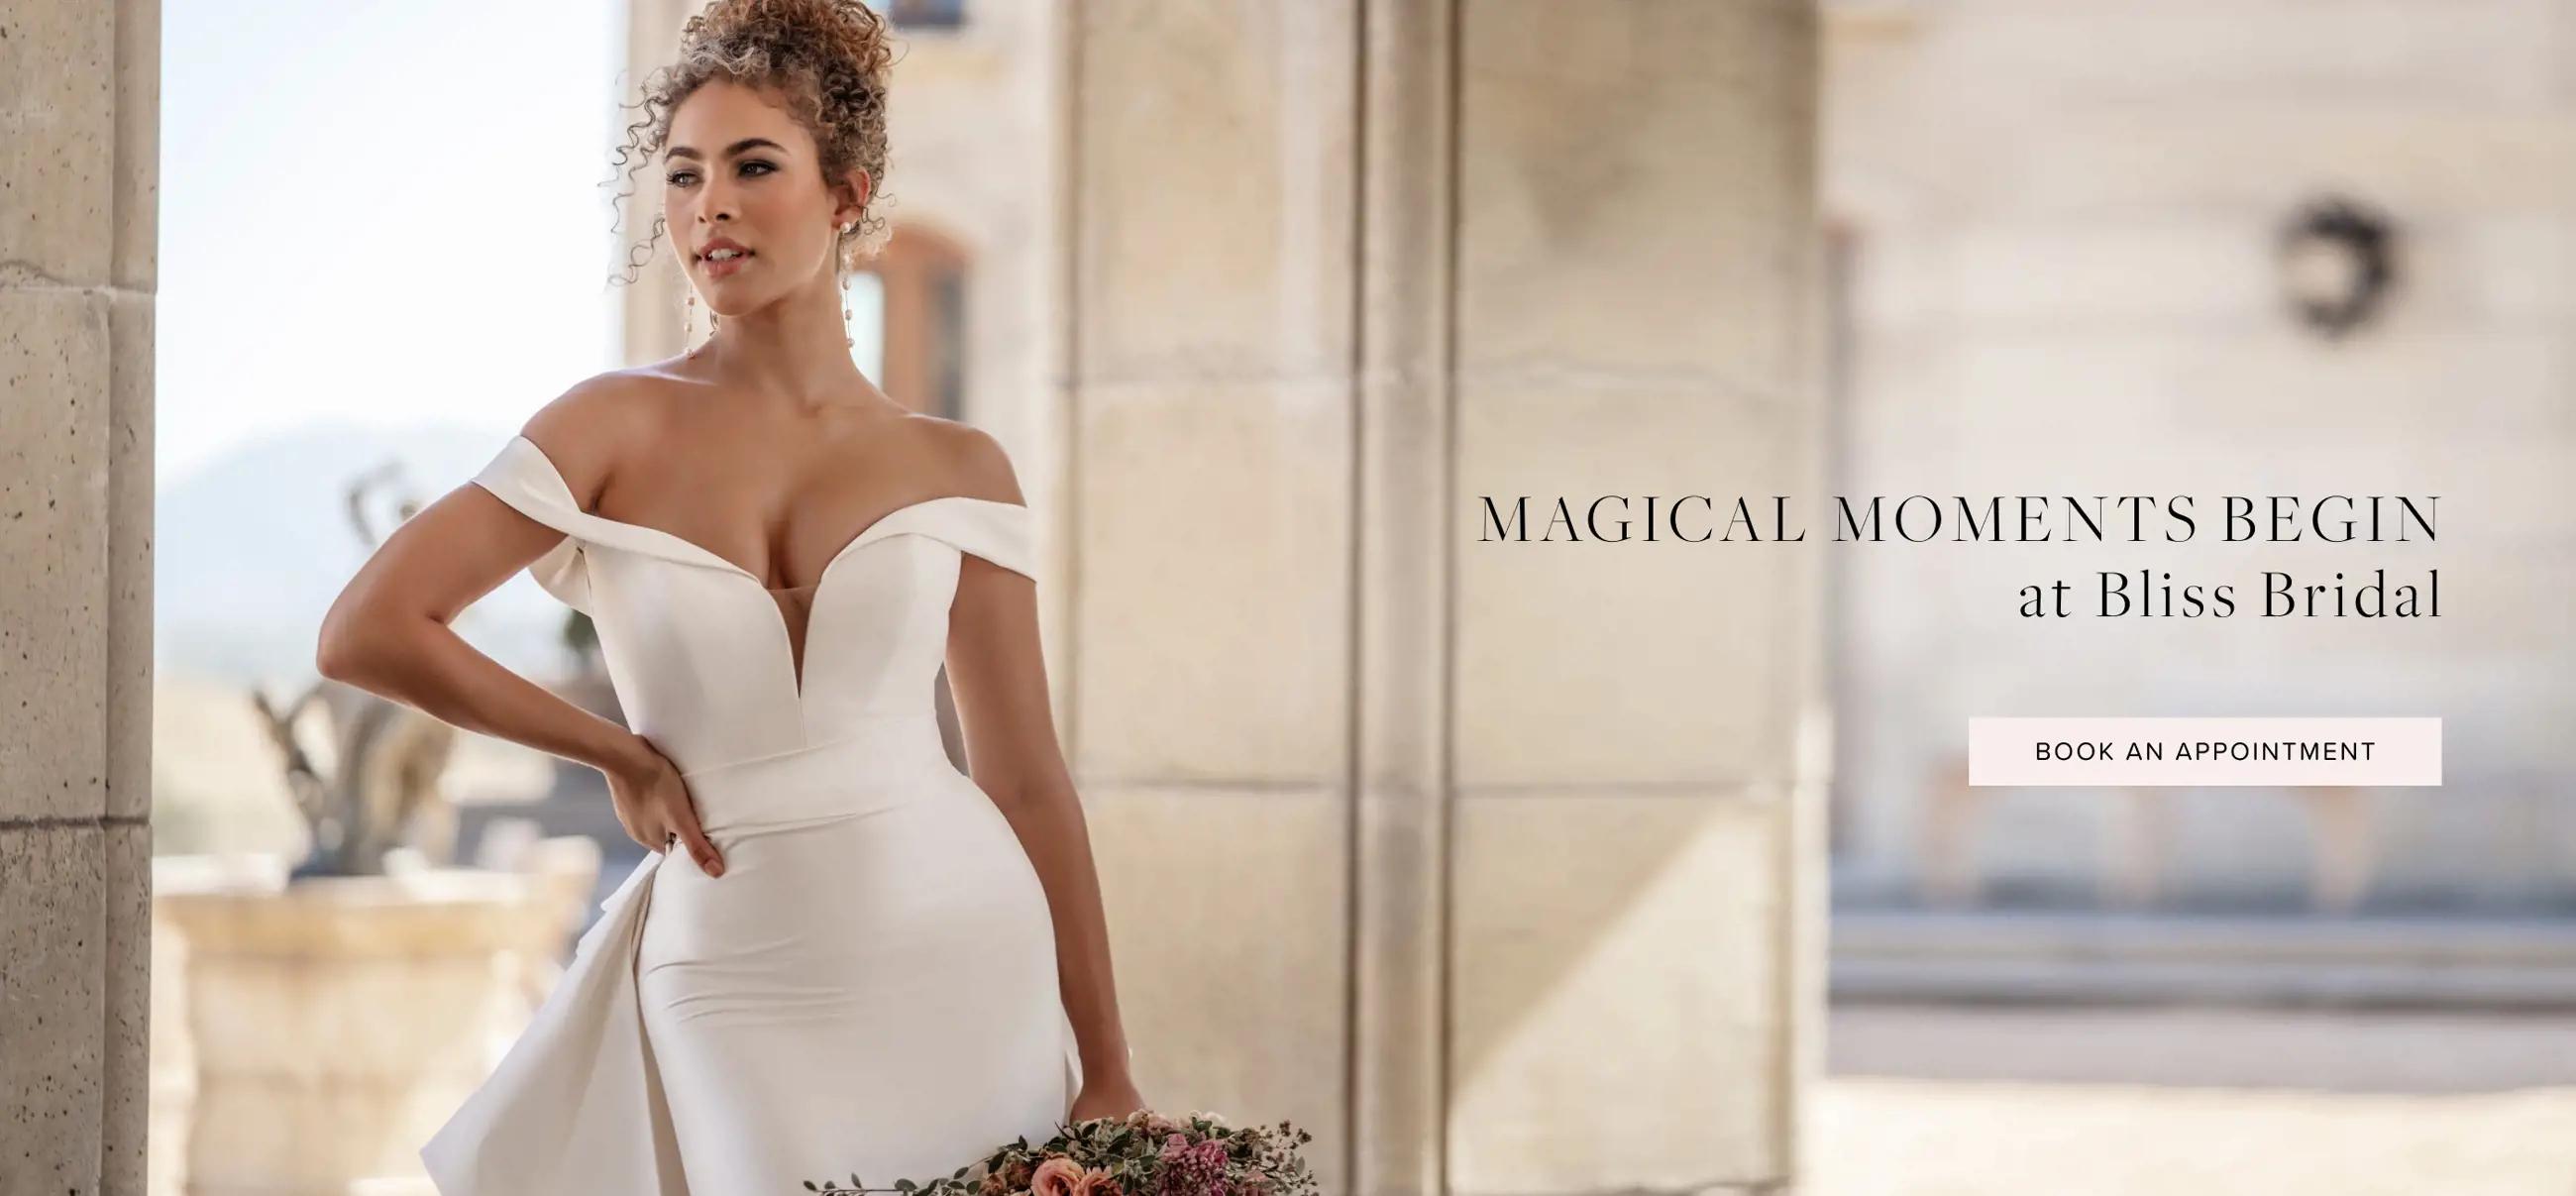 Stunning wedding gowns at Bliss Bridal